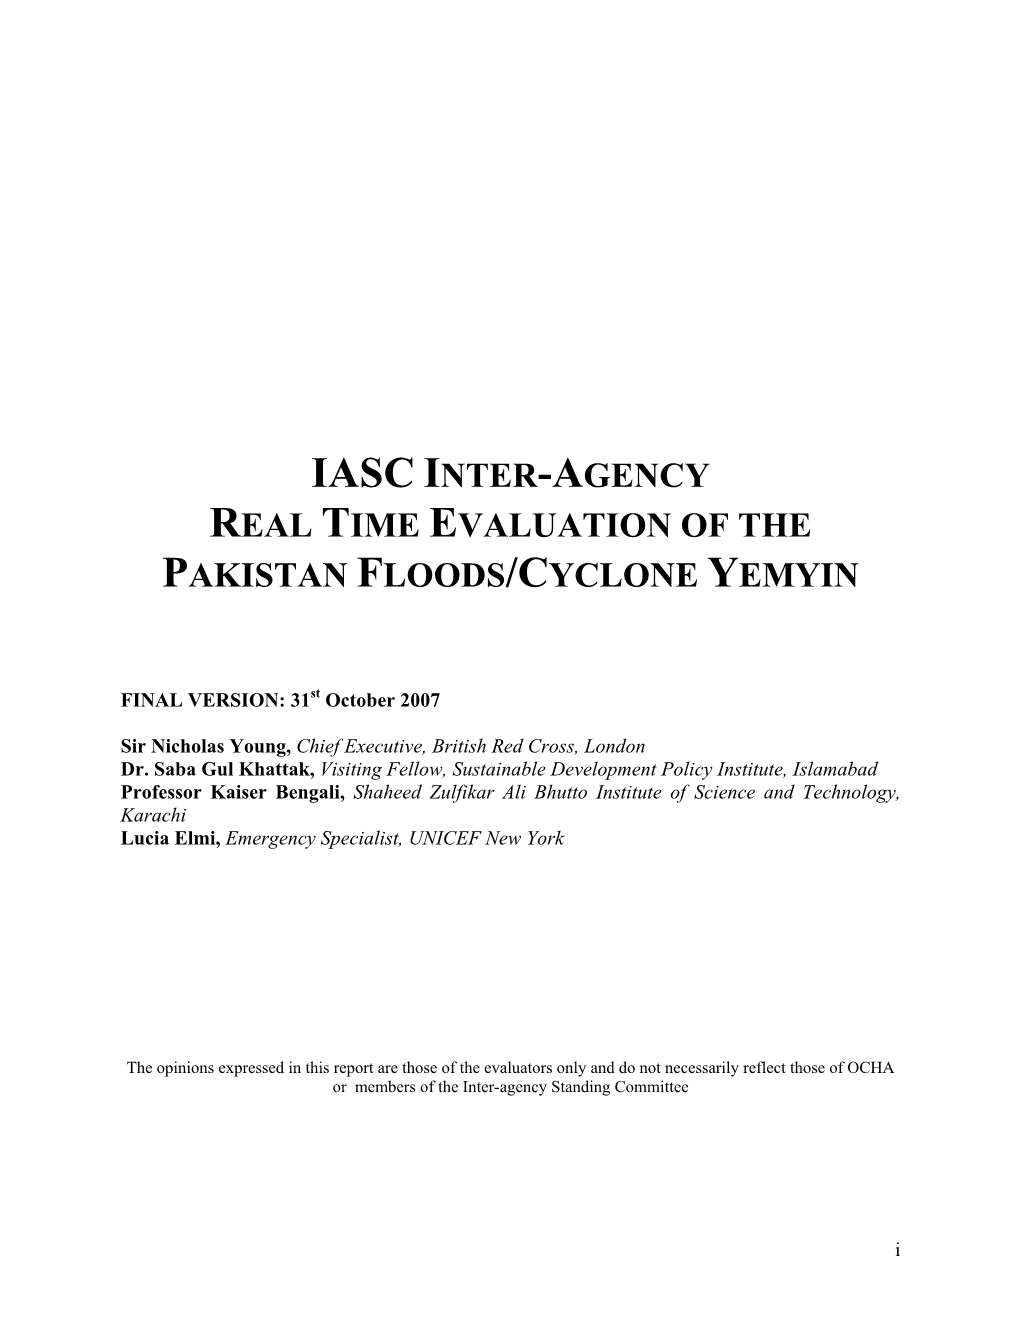 Iasc Inter-Agency Real Time Evaluation of the Pakistan Floods/Cyclone Yemyin